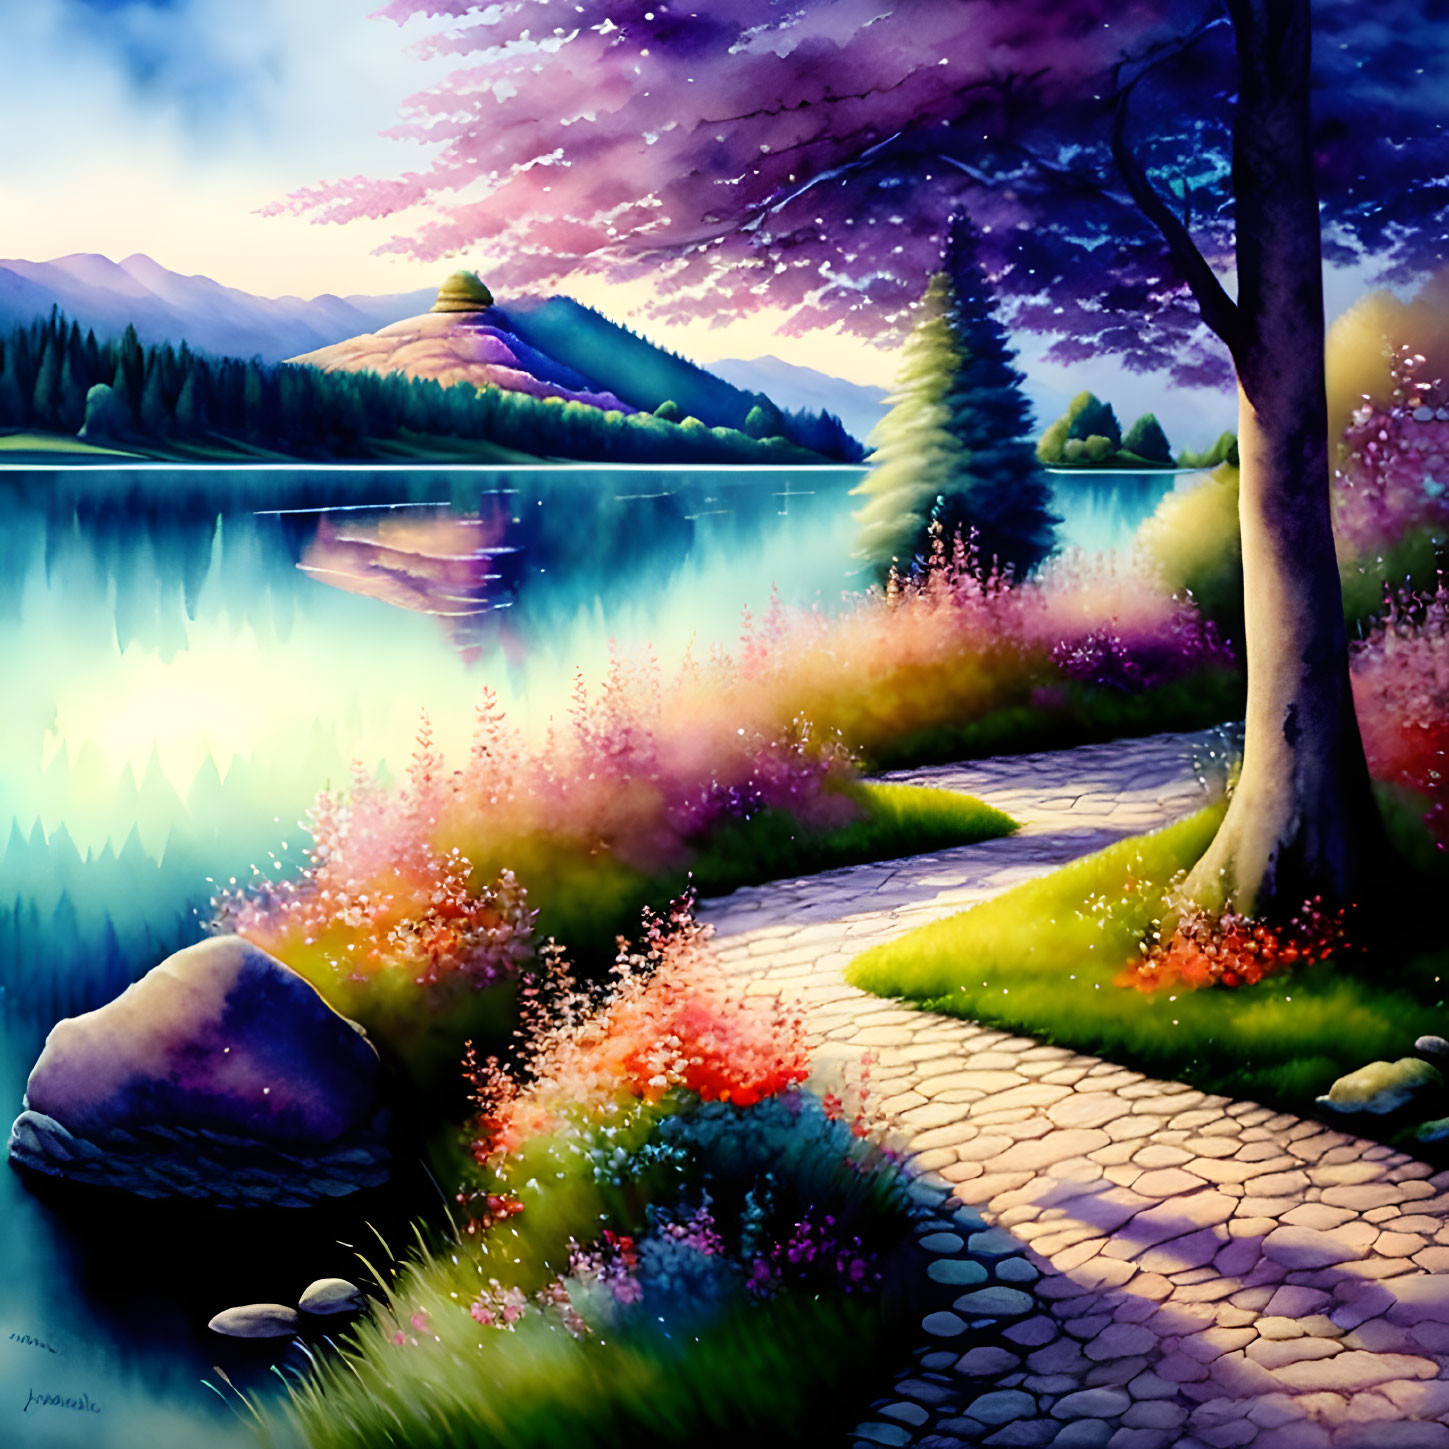 Colorful Landscape Painting: Cobblestone Path by Tranquil Lake